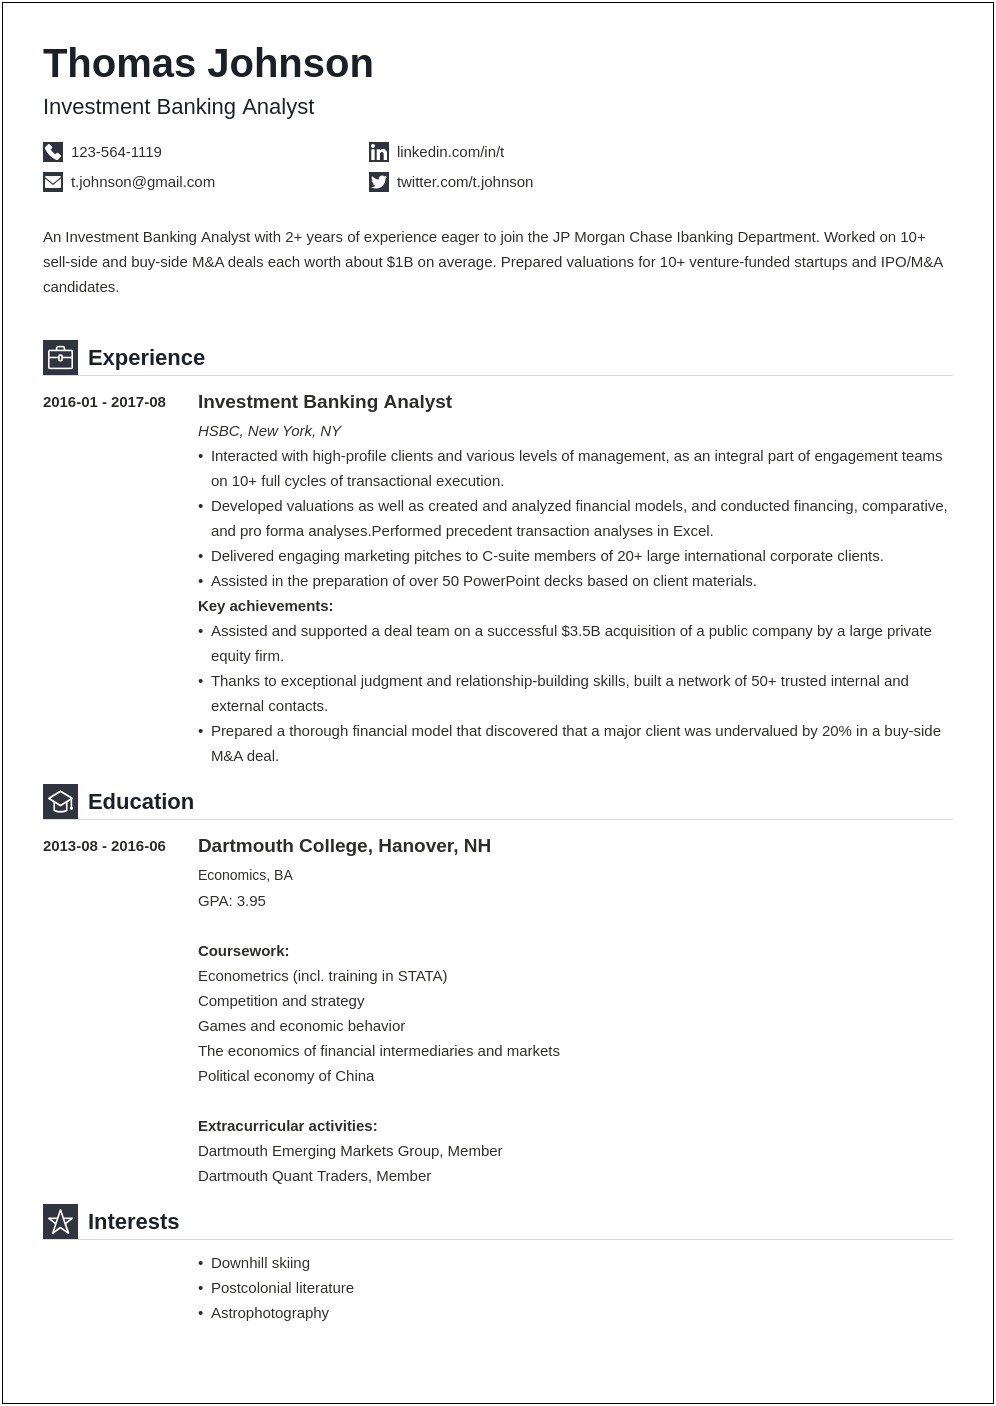 Best Font For Investment Banking Resume